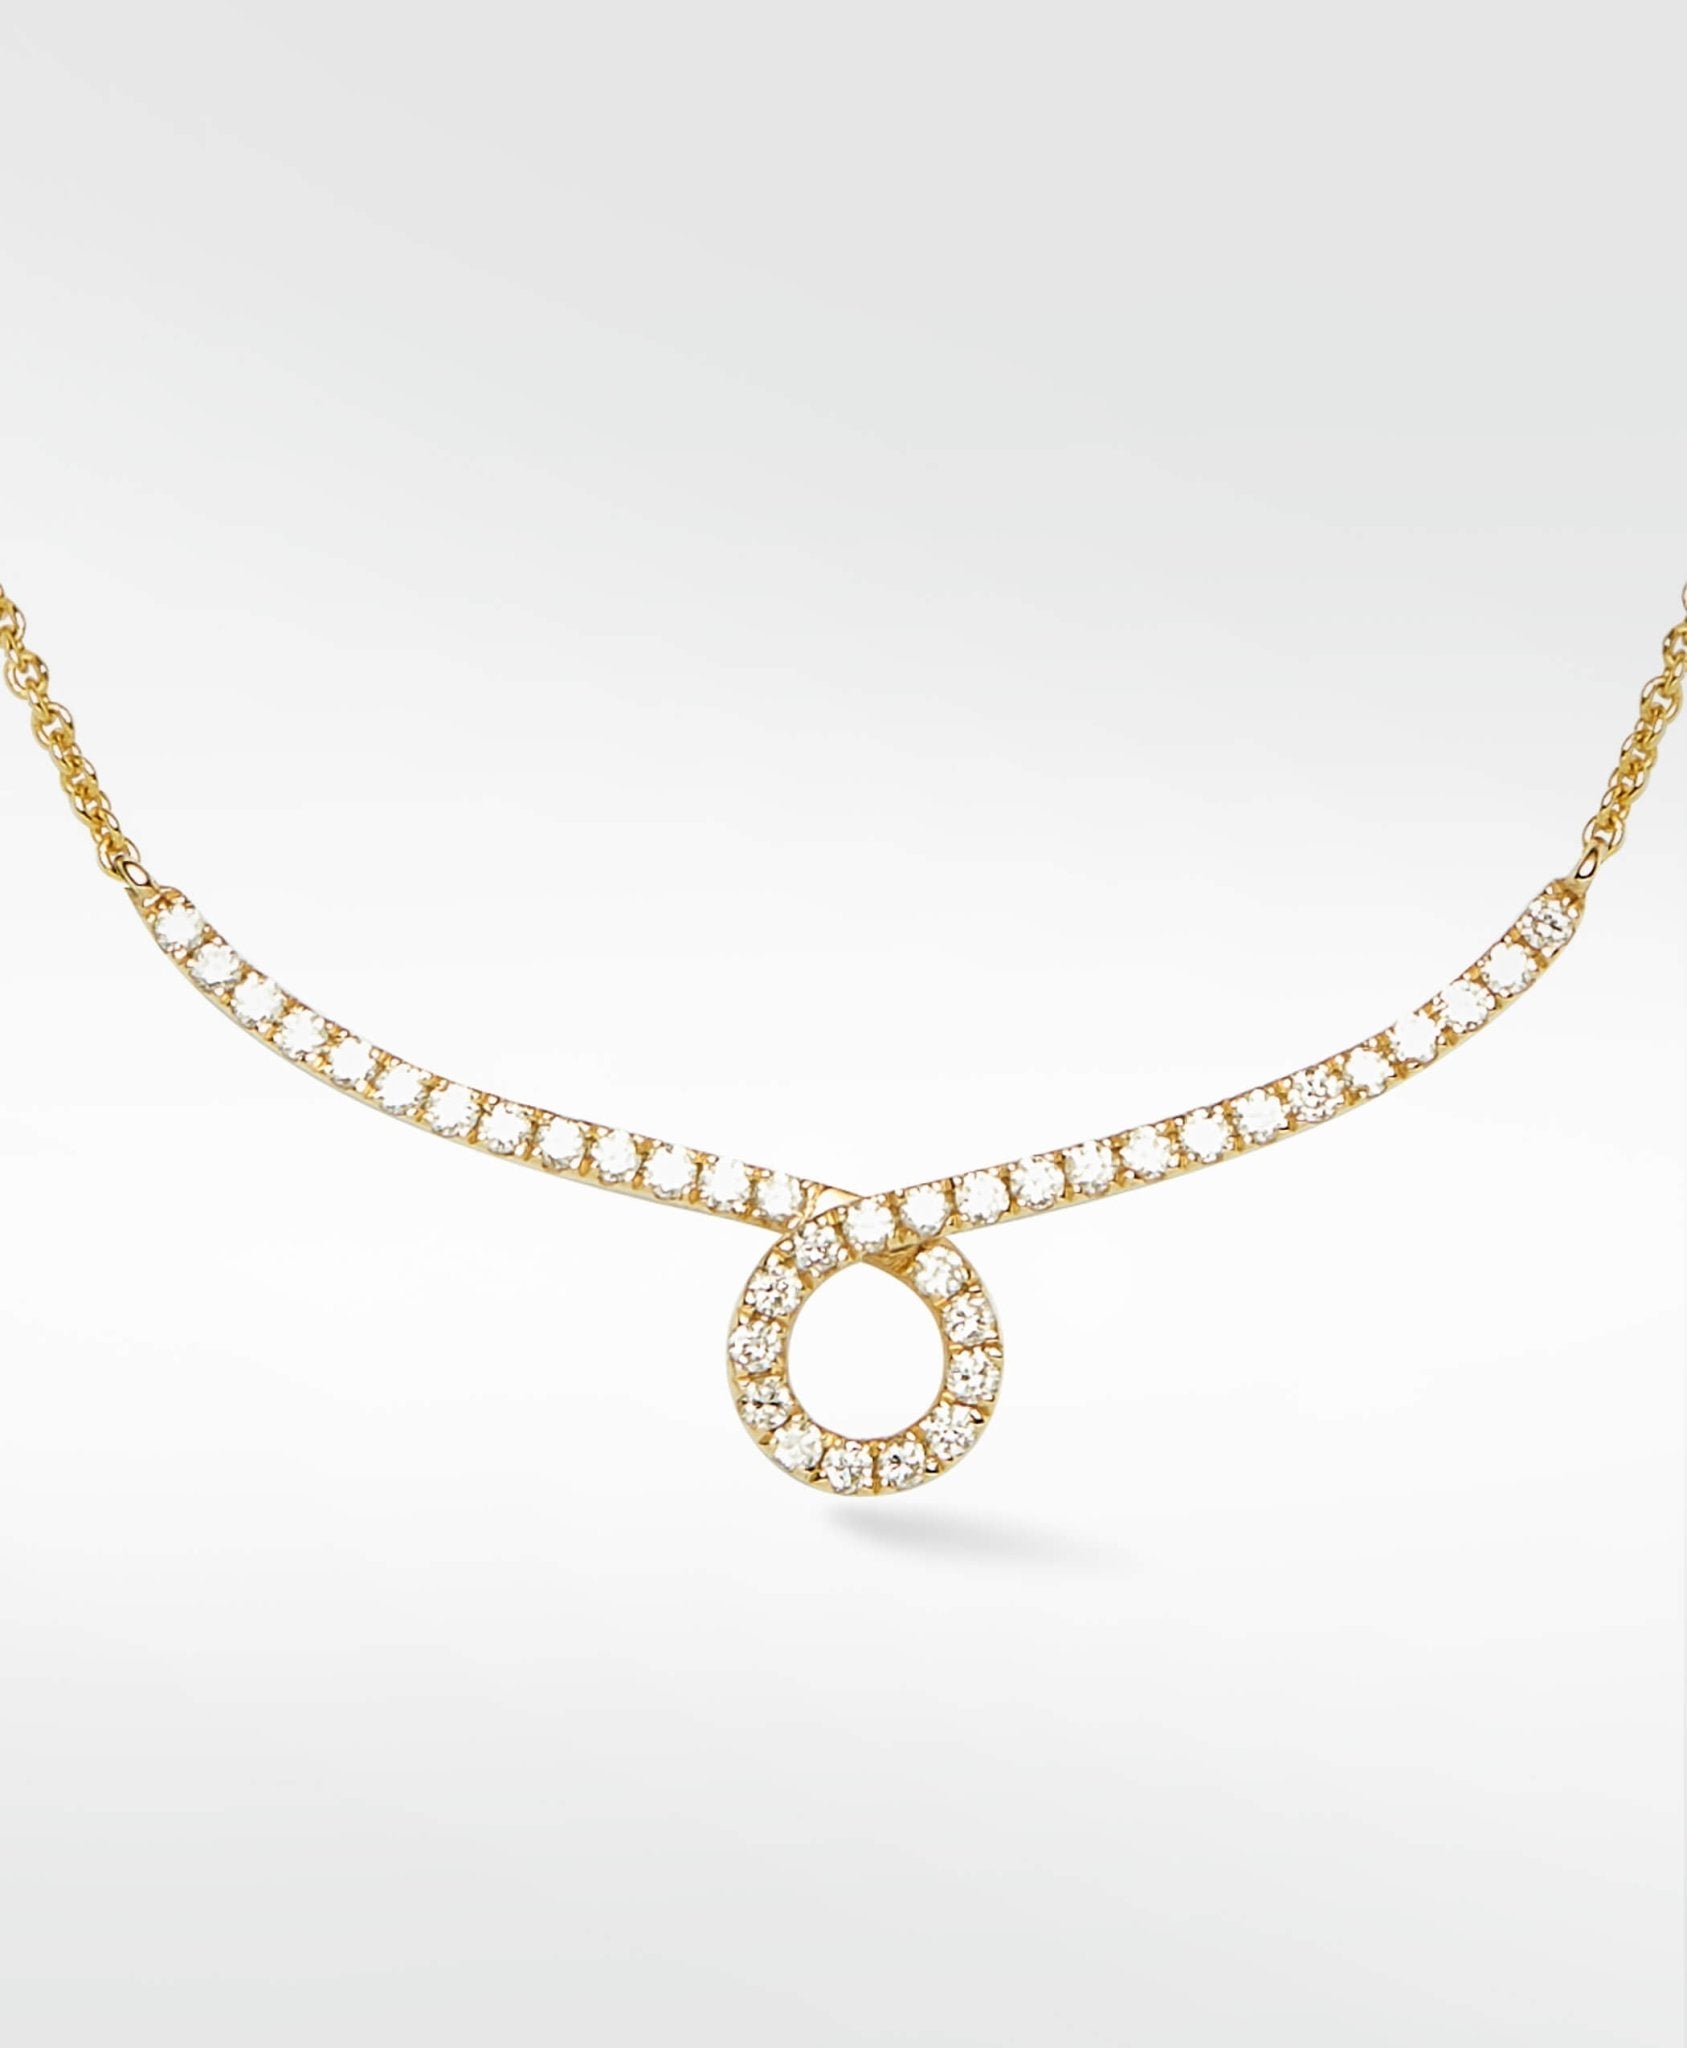 Modernist Diamond PavŽ Necklace in 14K Yellow Gold - Lark and Berry